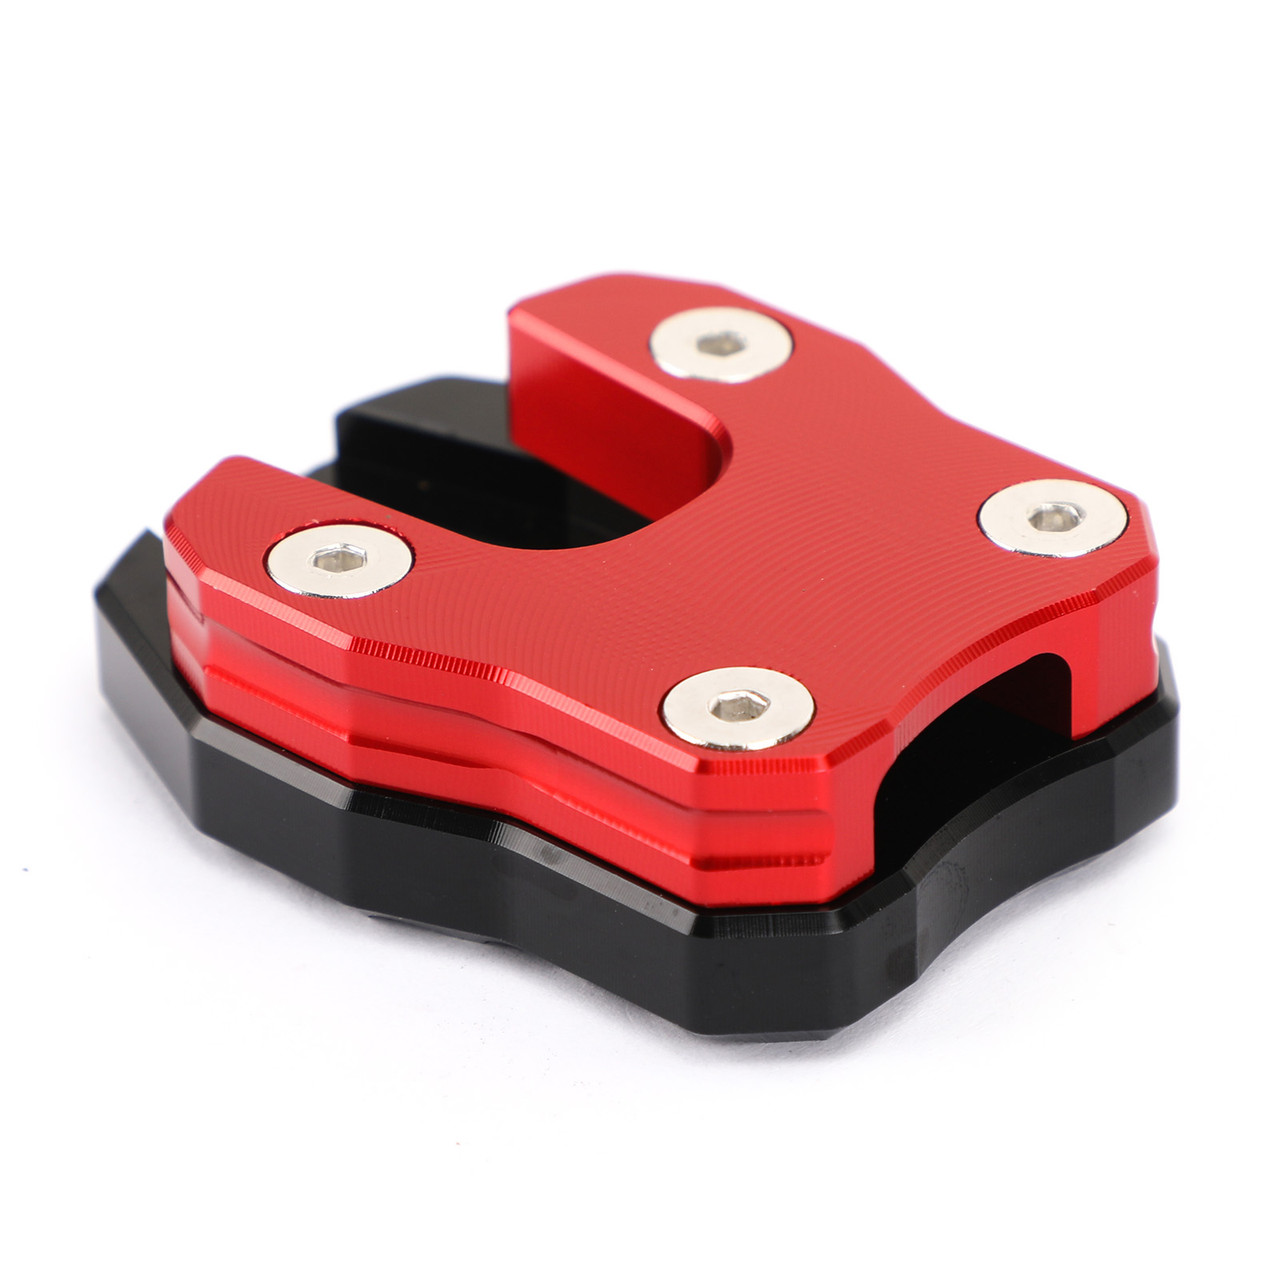 Kickstand Side Stand Extension Pad Fit For Honda ADV150 19-21 PCX 125 150 18-19 Red